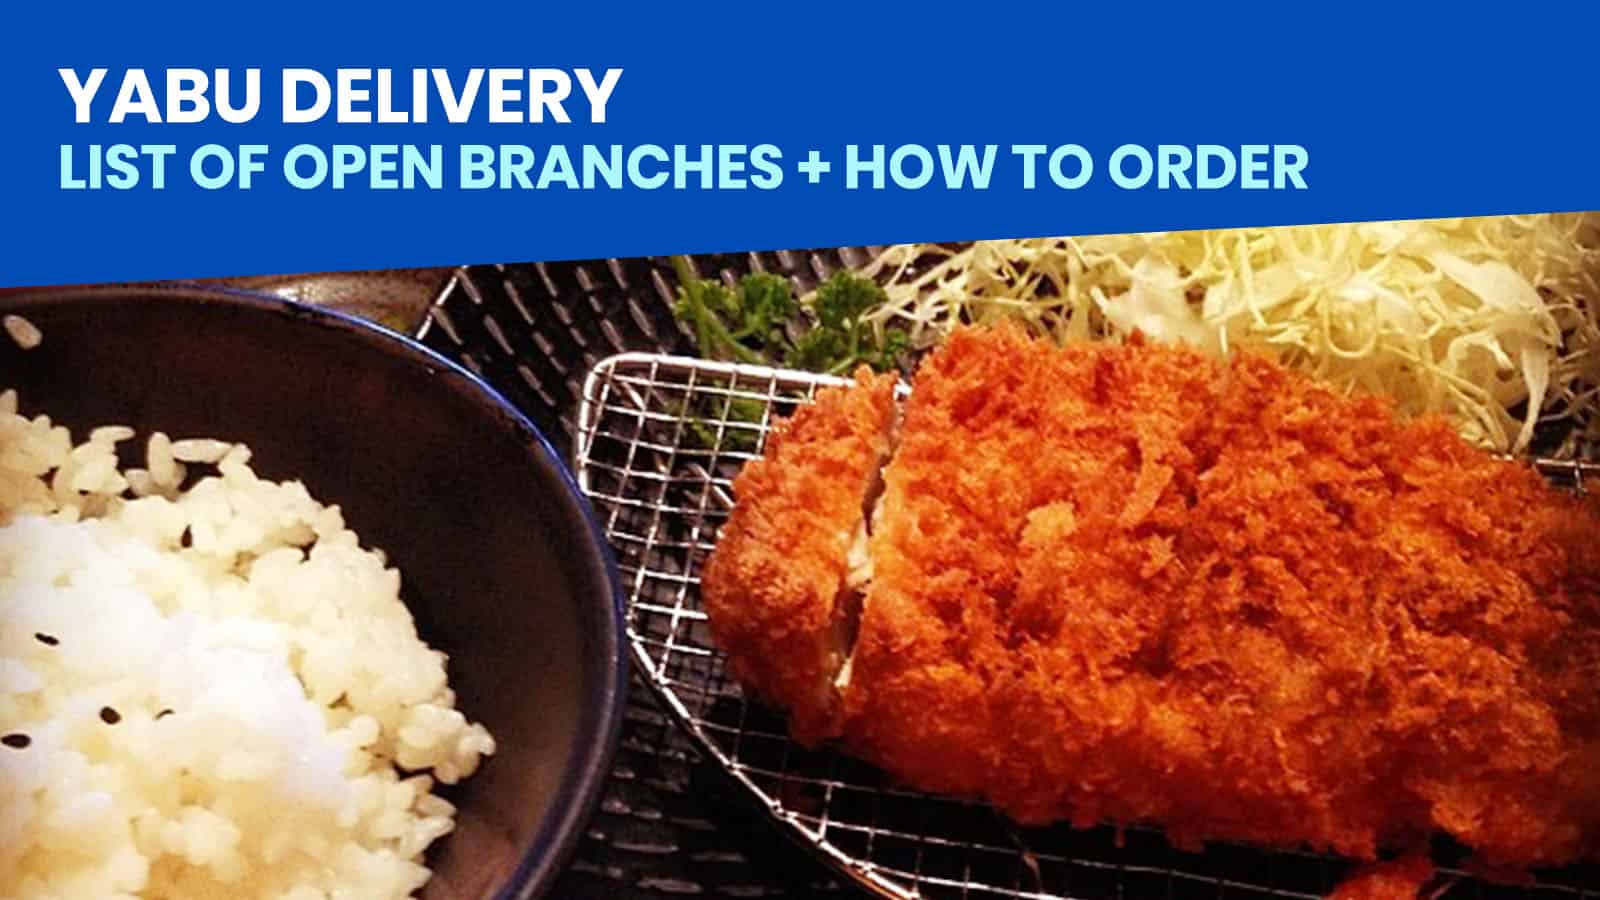 YABU DELIVERY: List of Open Branches + How to Order